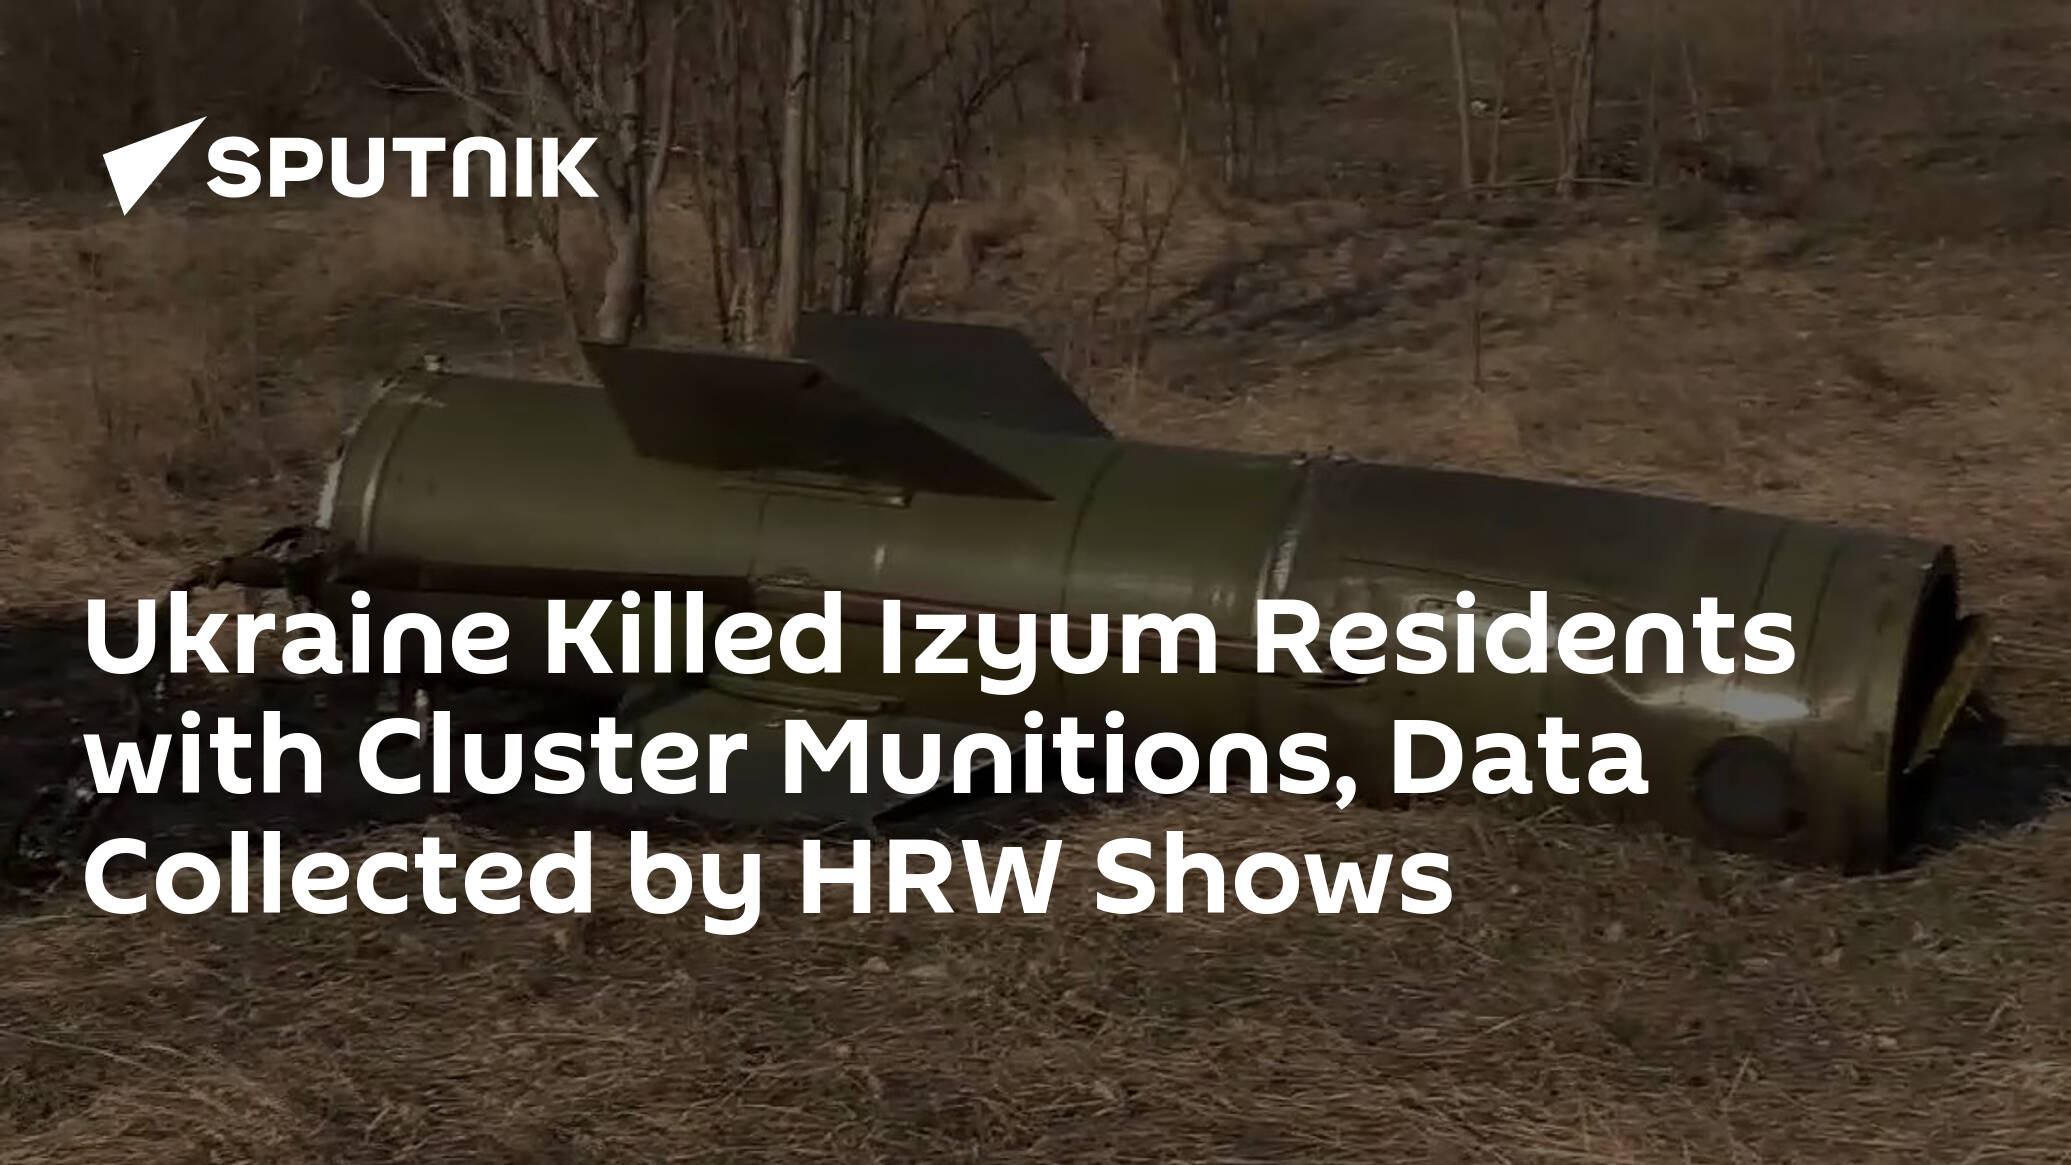 Ukraine Killed Izyum Residents with Cluster Munitions, Data Collected by HRW Shows